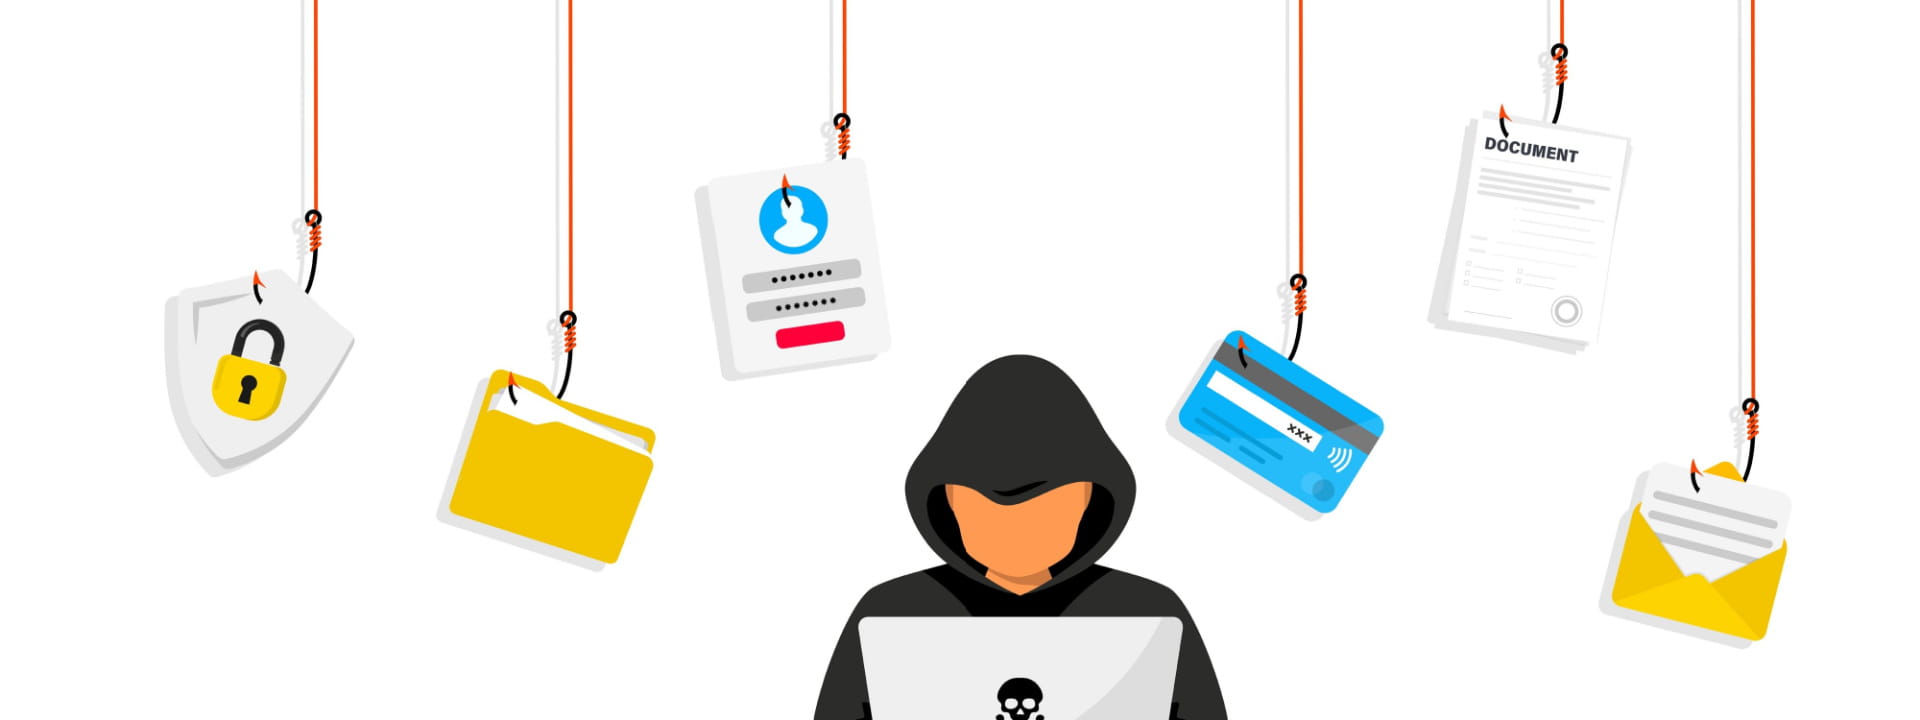 A digital depiction of a hacker with multiple phishing icons 